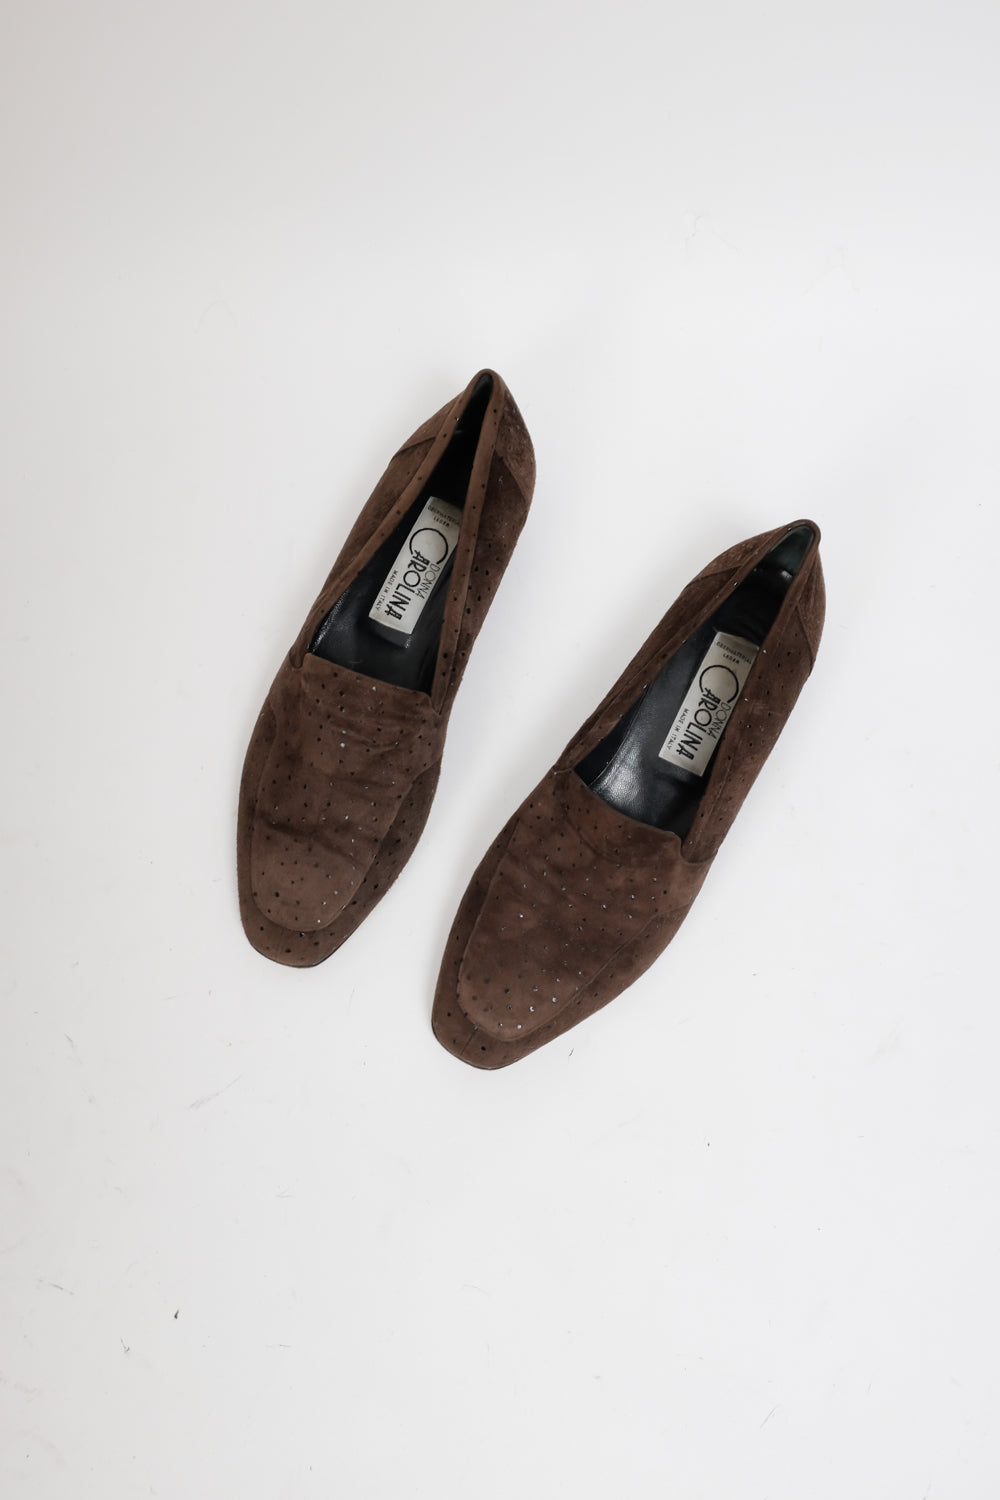 ITALY BROWN SUEDE LEATHER LOAFERS 40